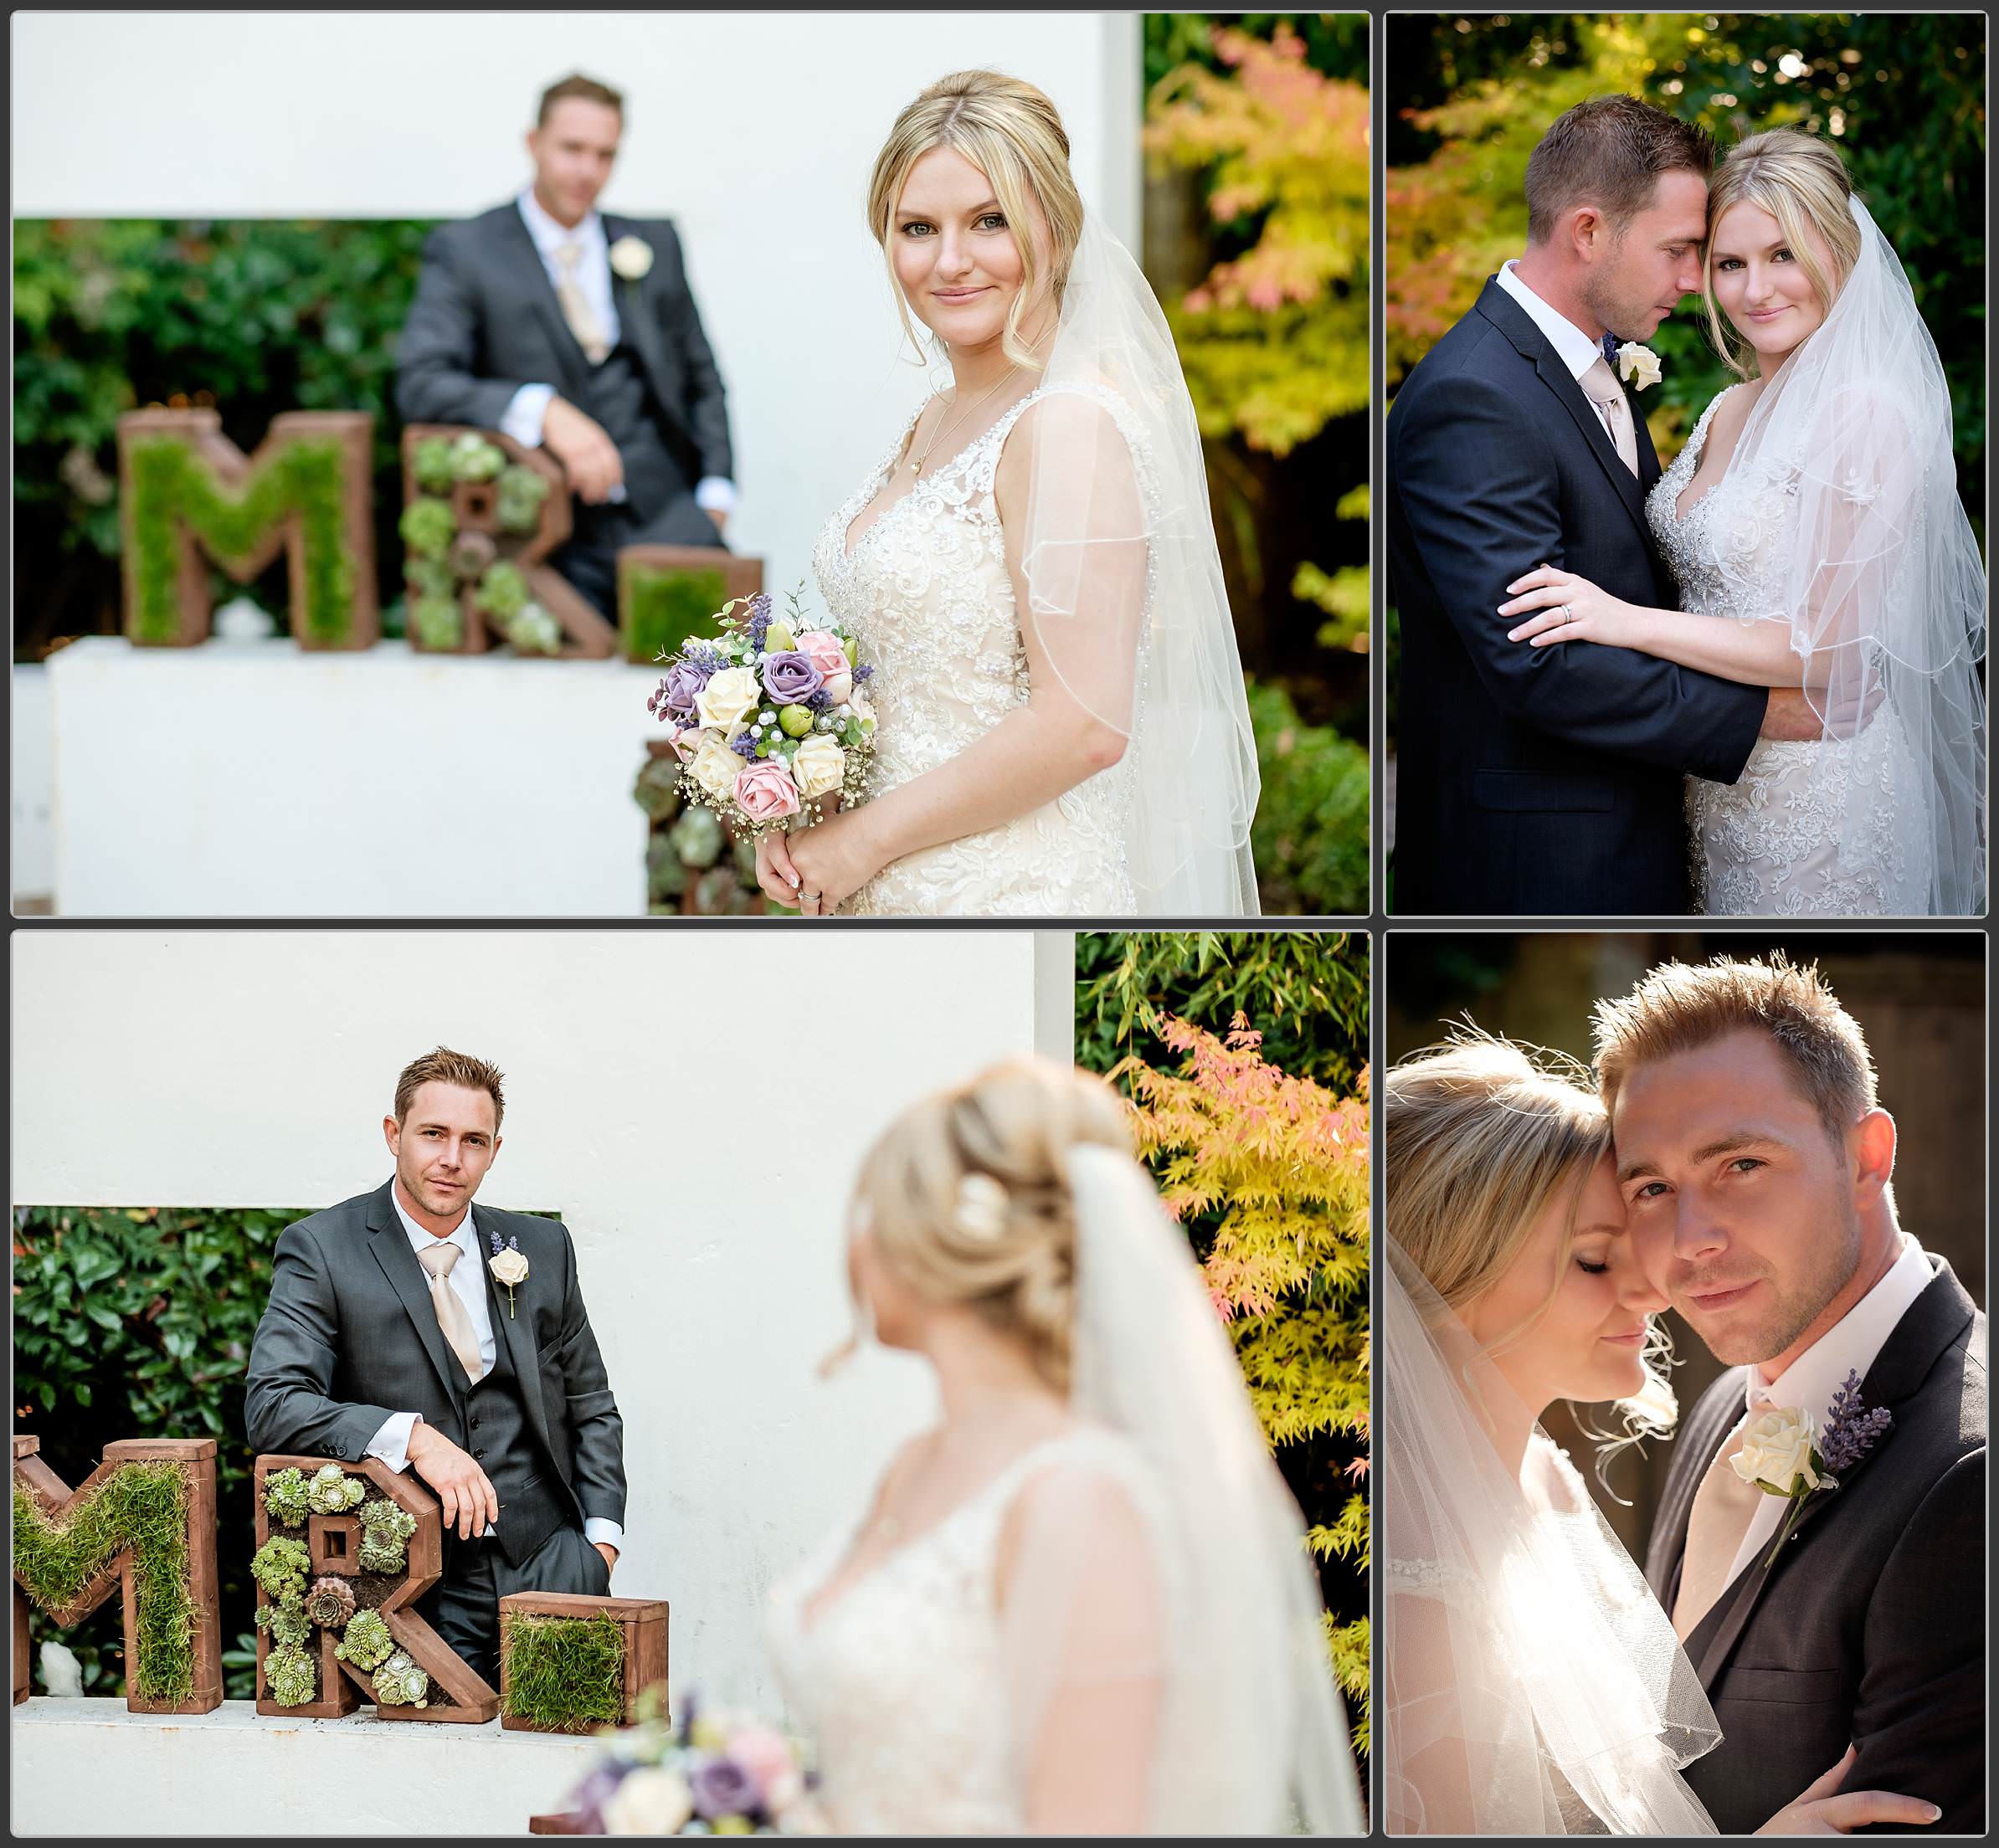 Bride and Groom together at Moxhull Hall Hotel